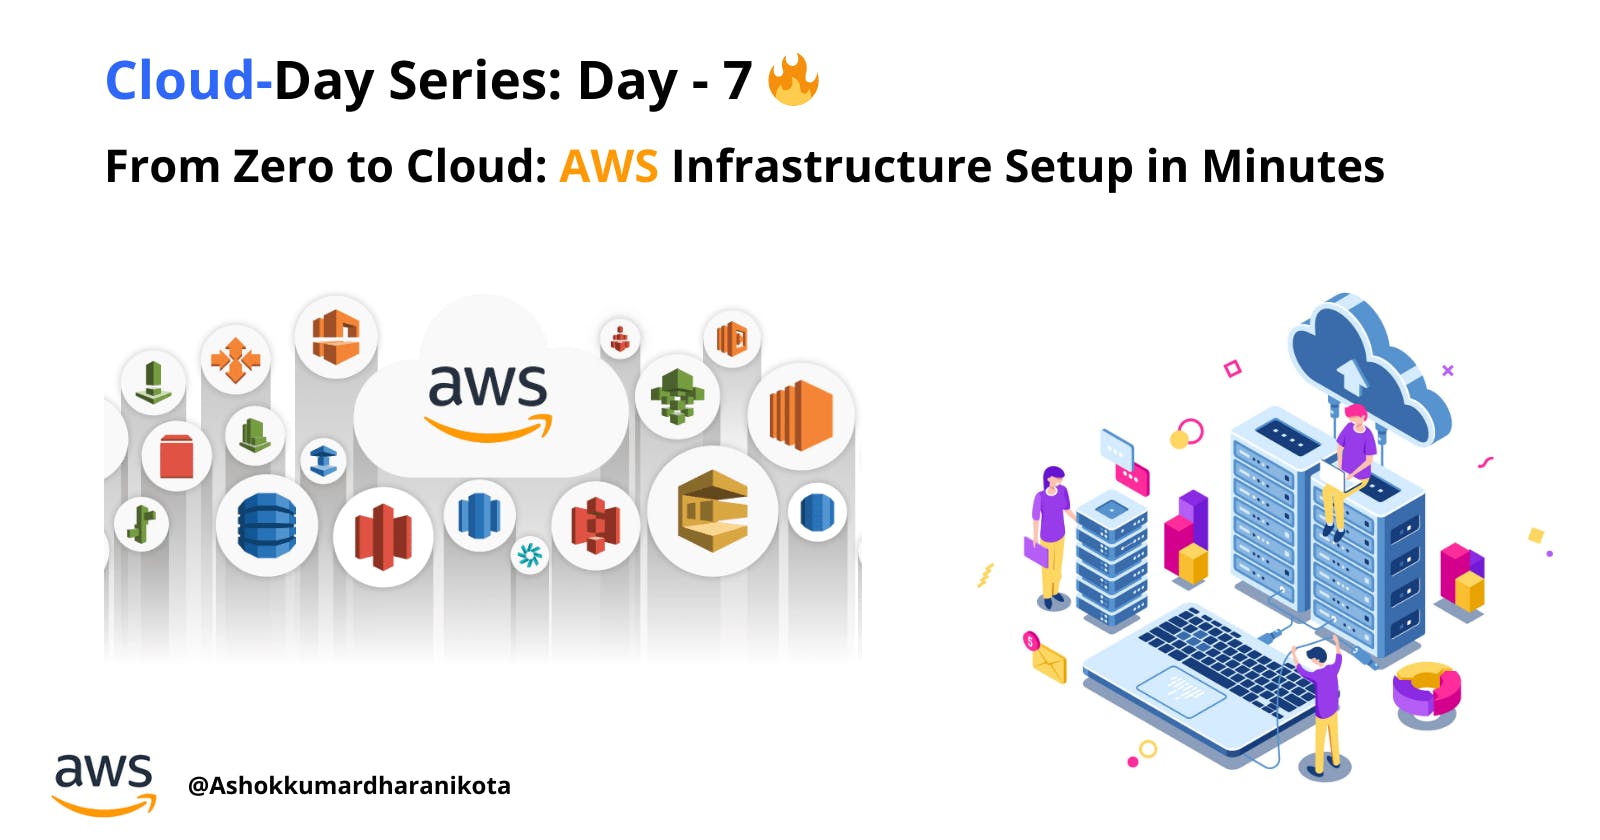 From Zero to Cloud: AWS Infrastructure Setup in Minutes